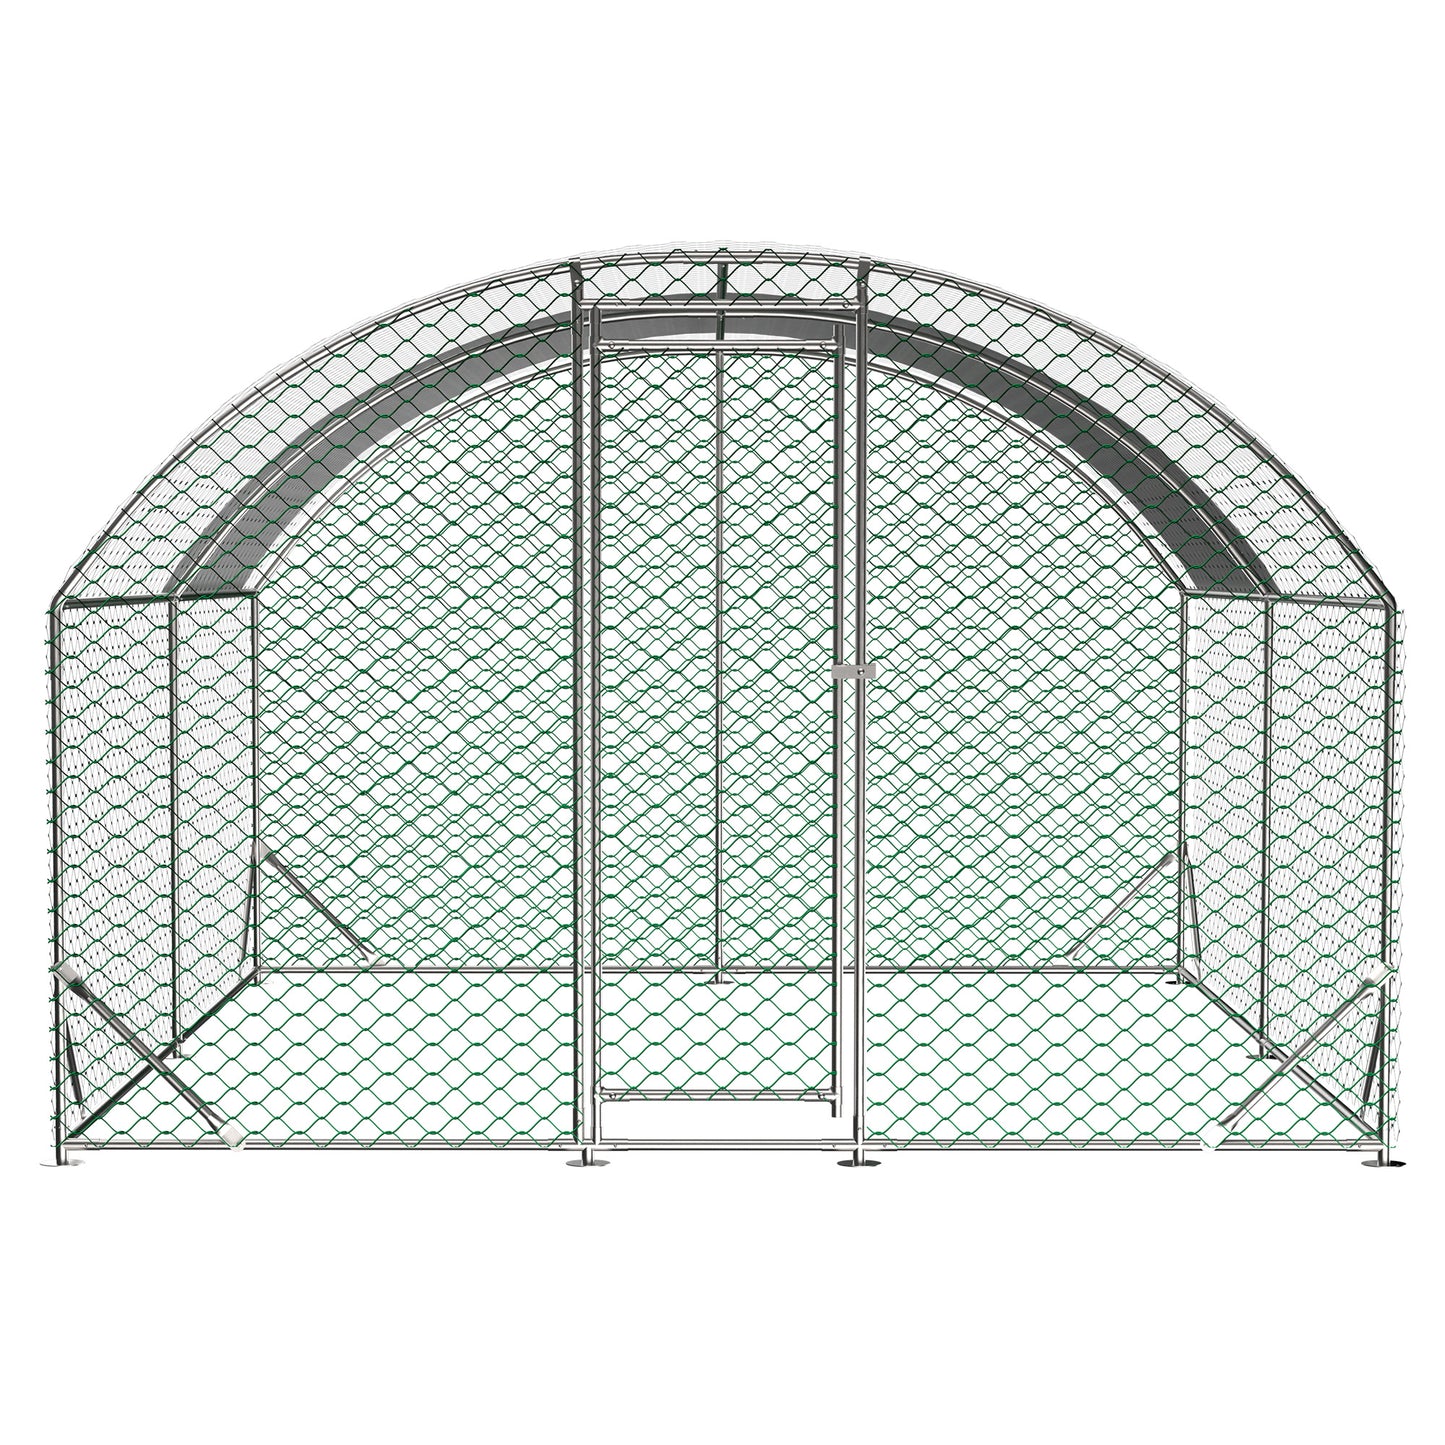 Large Chicken Coop Metal Chicken Run with Waterproof and Anti-UV Cover, Dome Shaped Walk-in Fence Cage Hen House for Outdoor and Yard Farm Use, 1" Tube Diameter, 9.84' x 13.12' x 6.56'